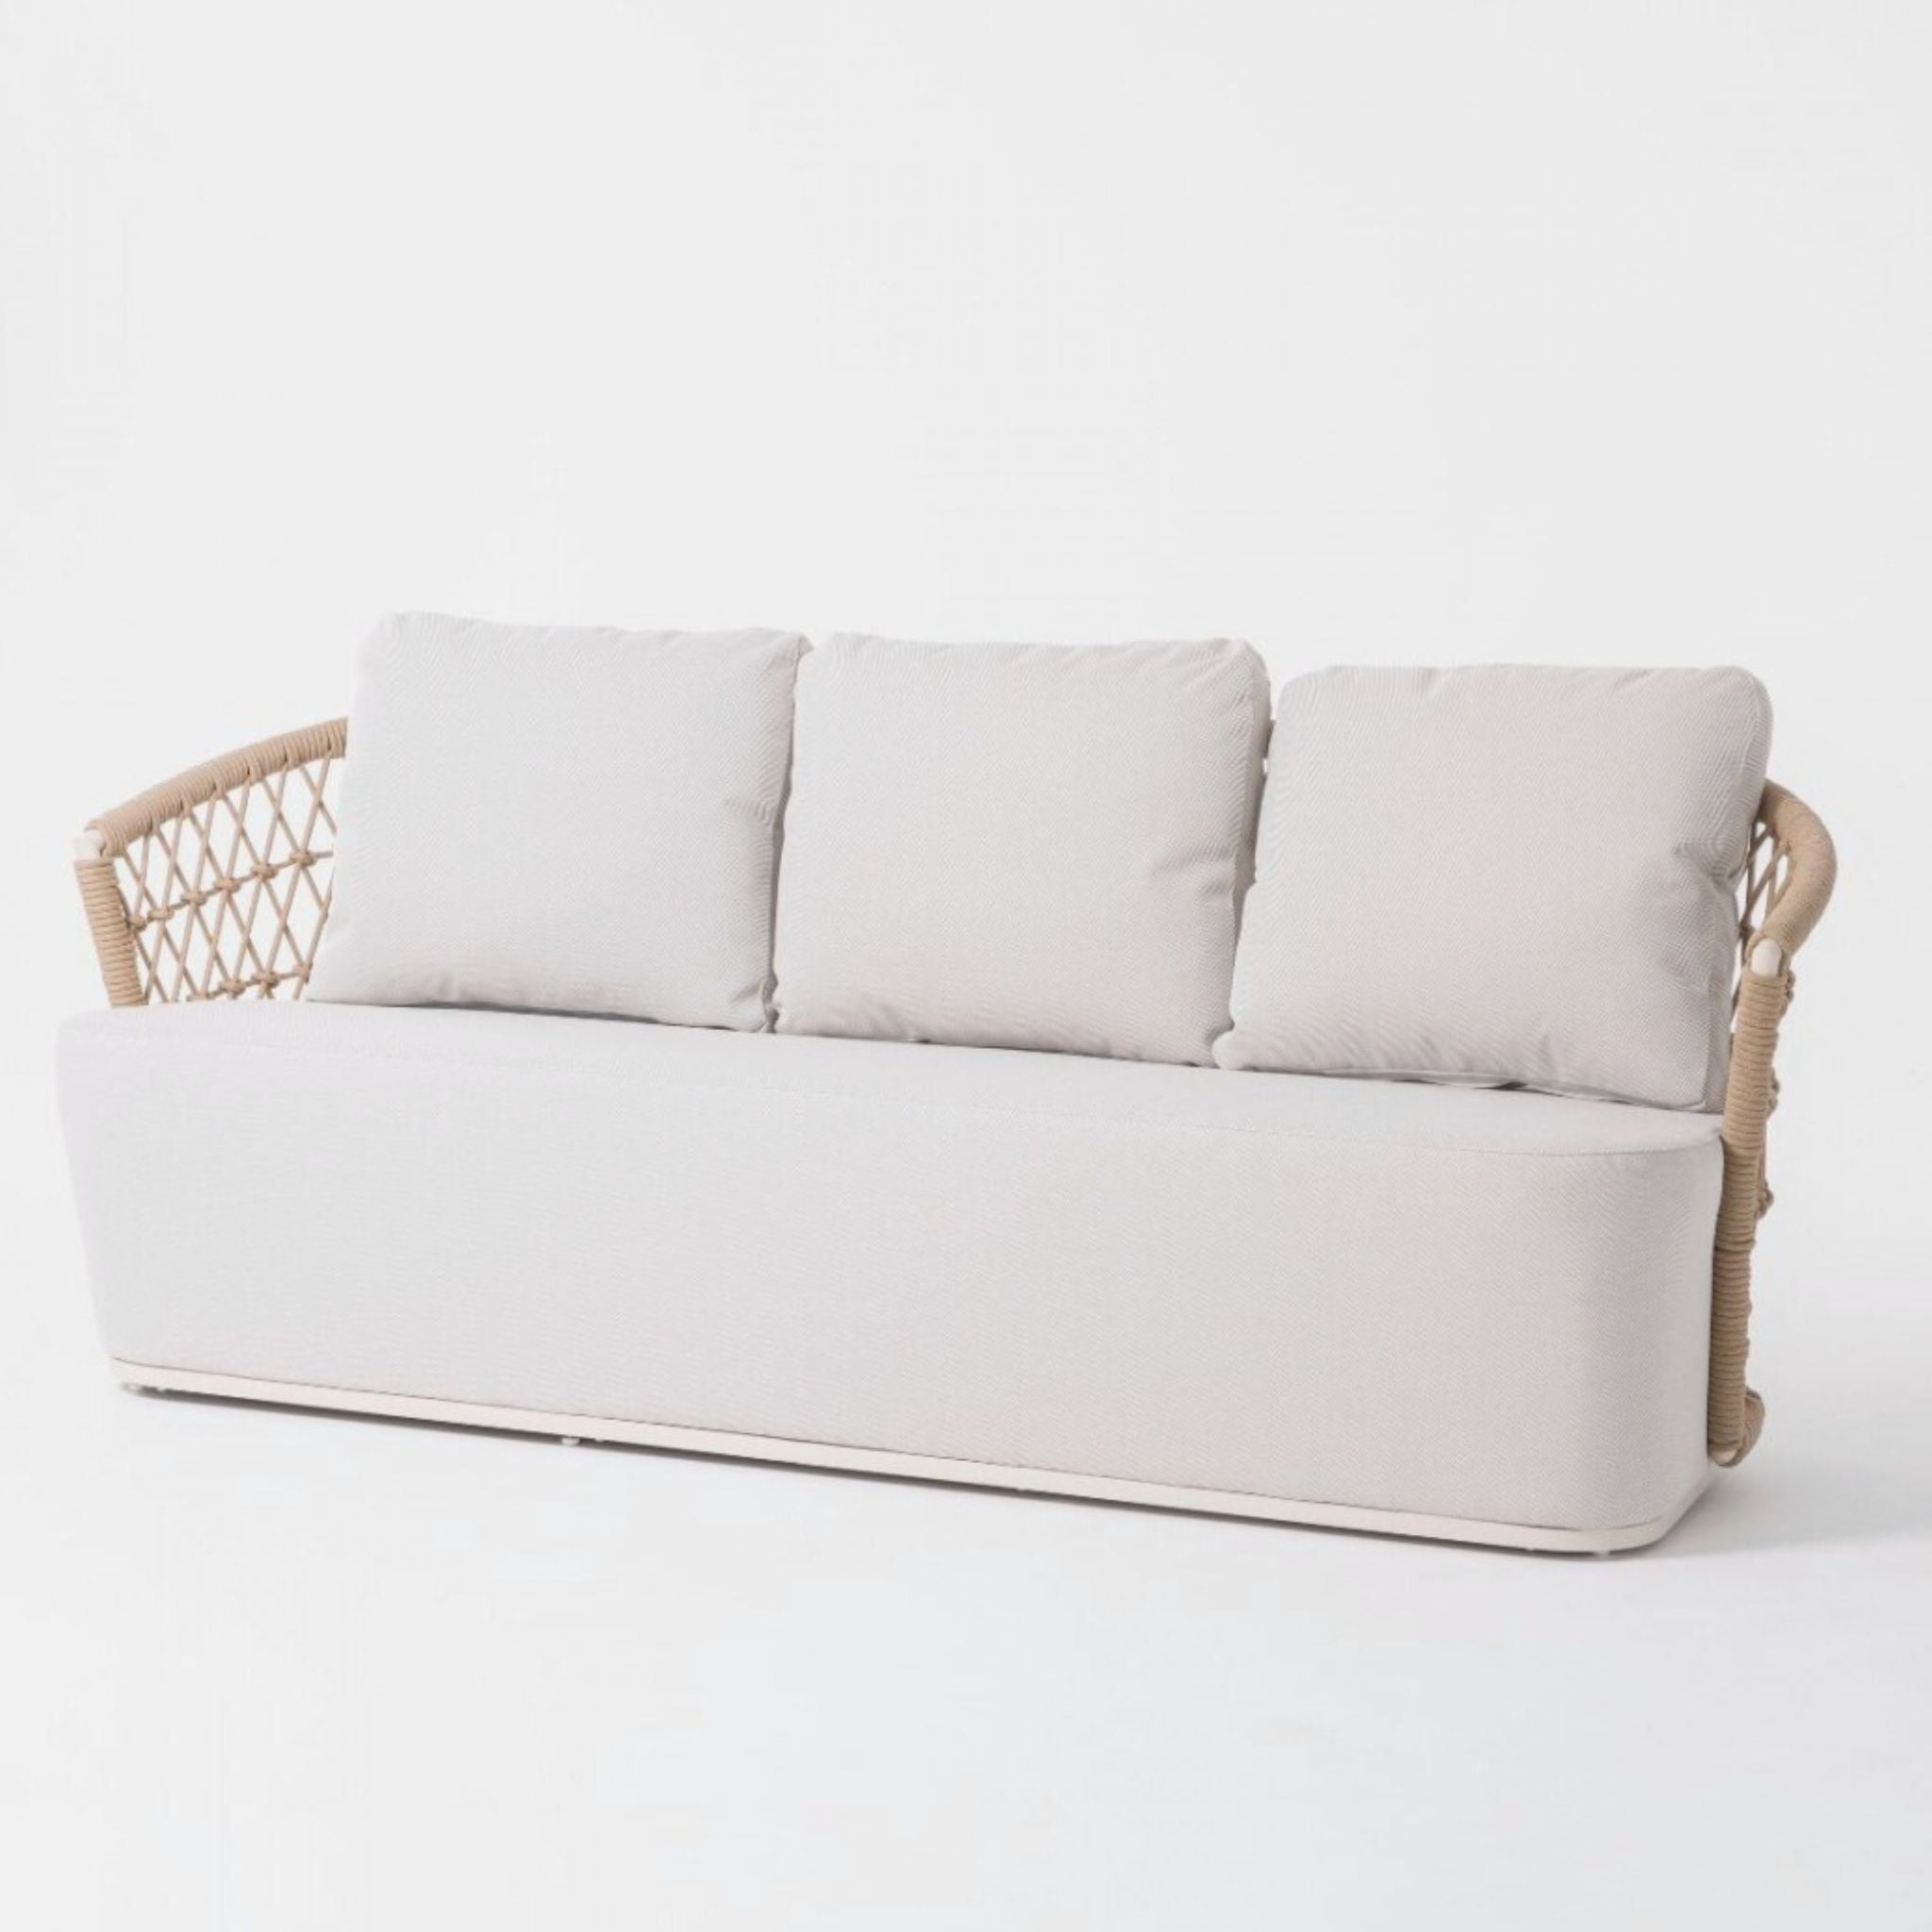 Crisal Decoracion Isquia-1 Sofa With Network Structure Rope And Aluminum - ModernistaLiving